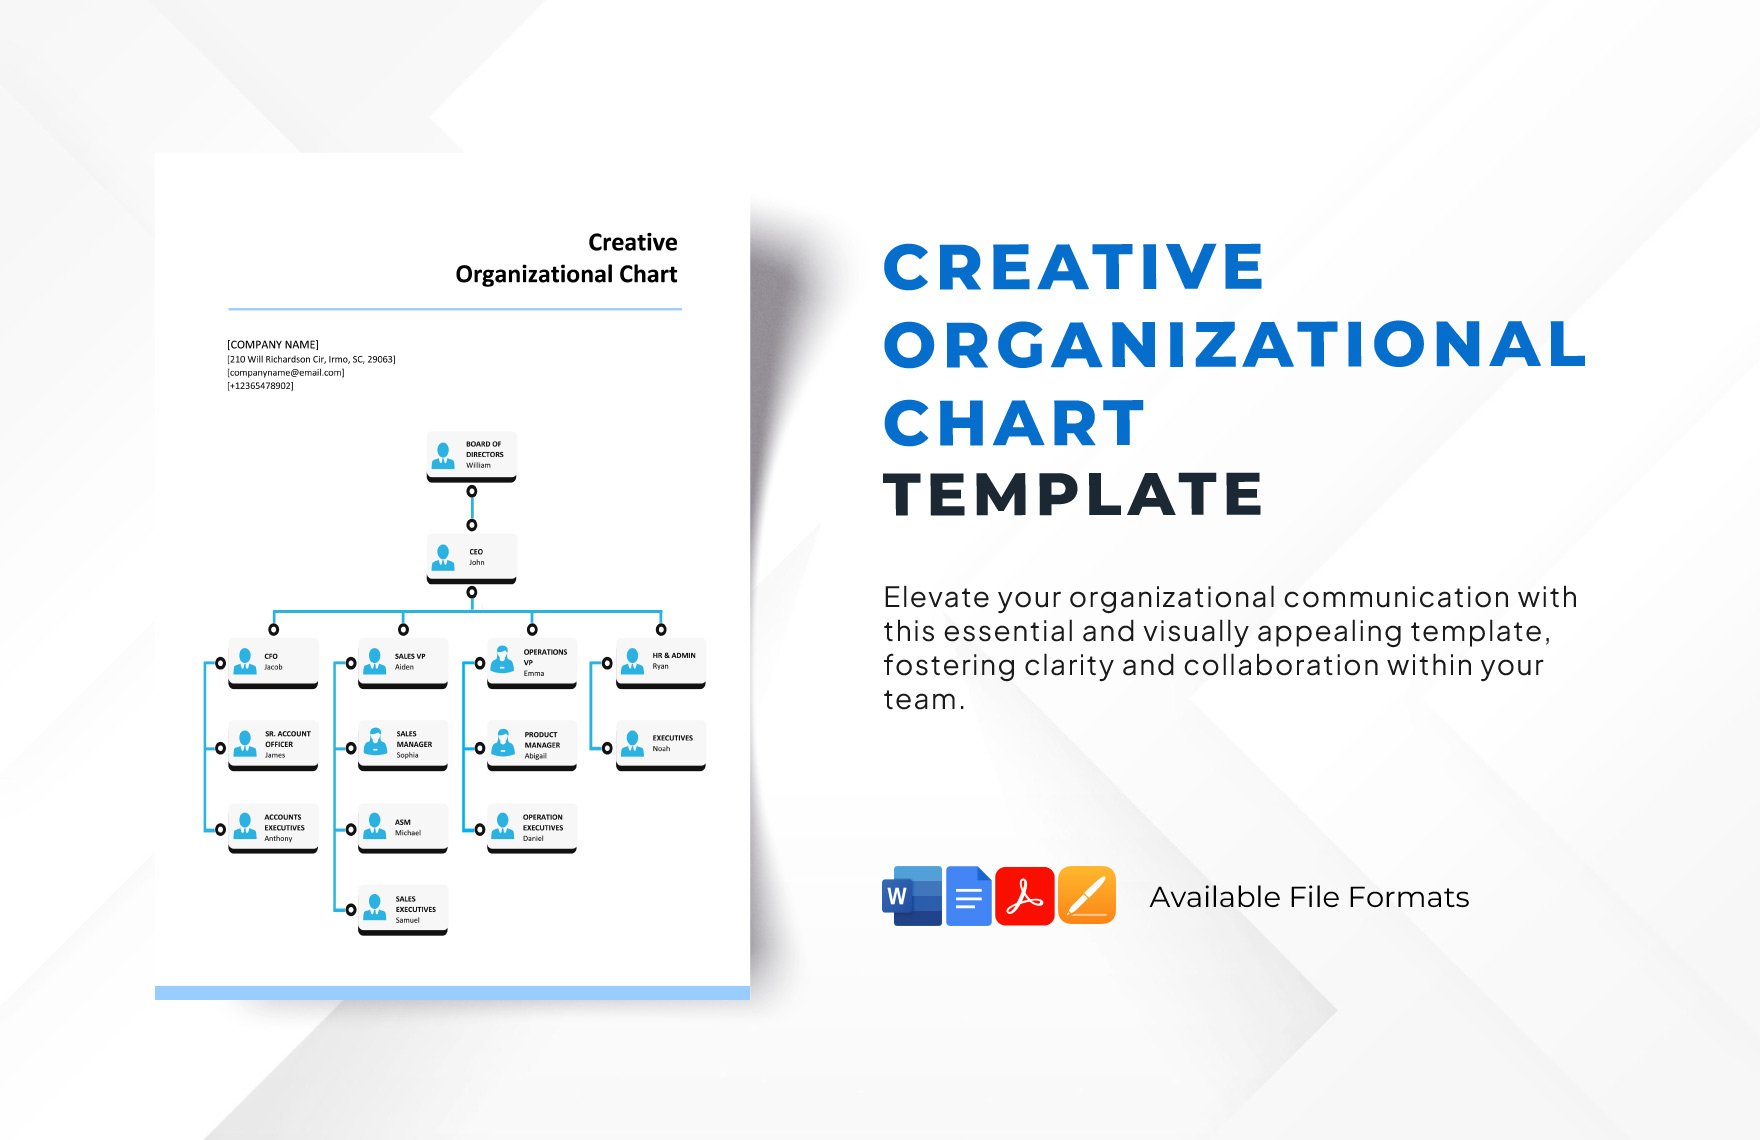 Creative Organizational Chart Template in Word, Google Docs, PDF, Apple Pages